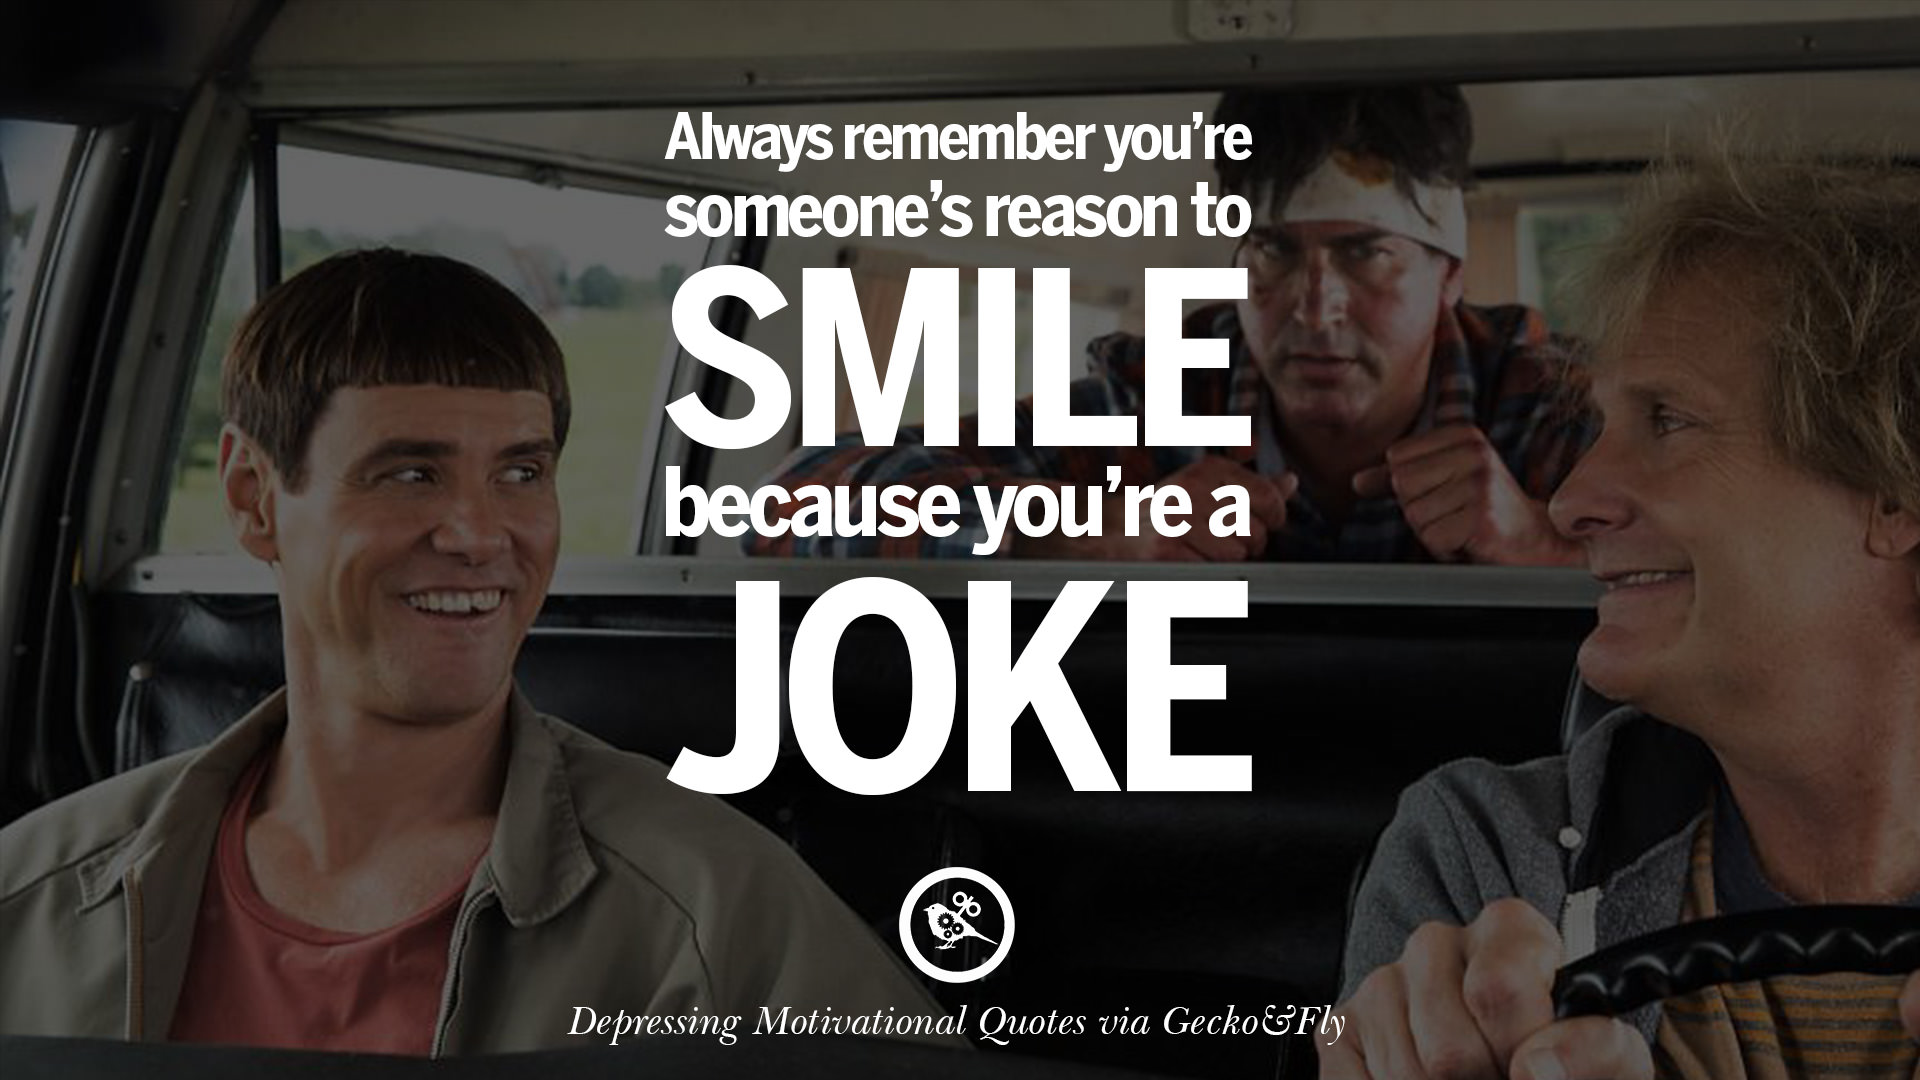 You re joking. Always remember you're someone's reason to smile because you're a joke. Remember youre someones reasons to smile because youre a joke. You're someone's reason to Masturbate обои. Always remember you're someone's reason to smile перевод на русский.